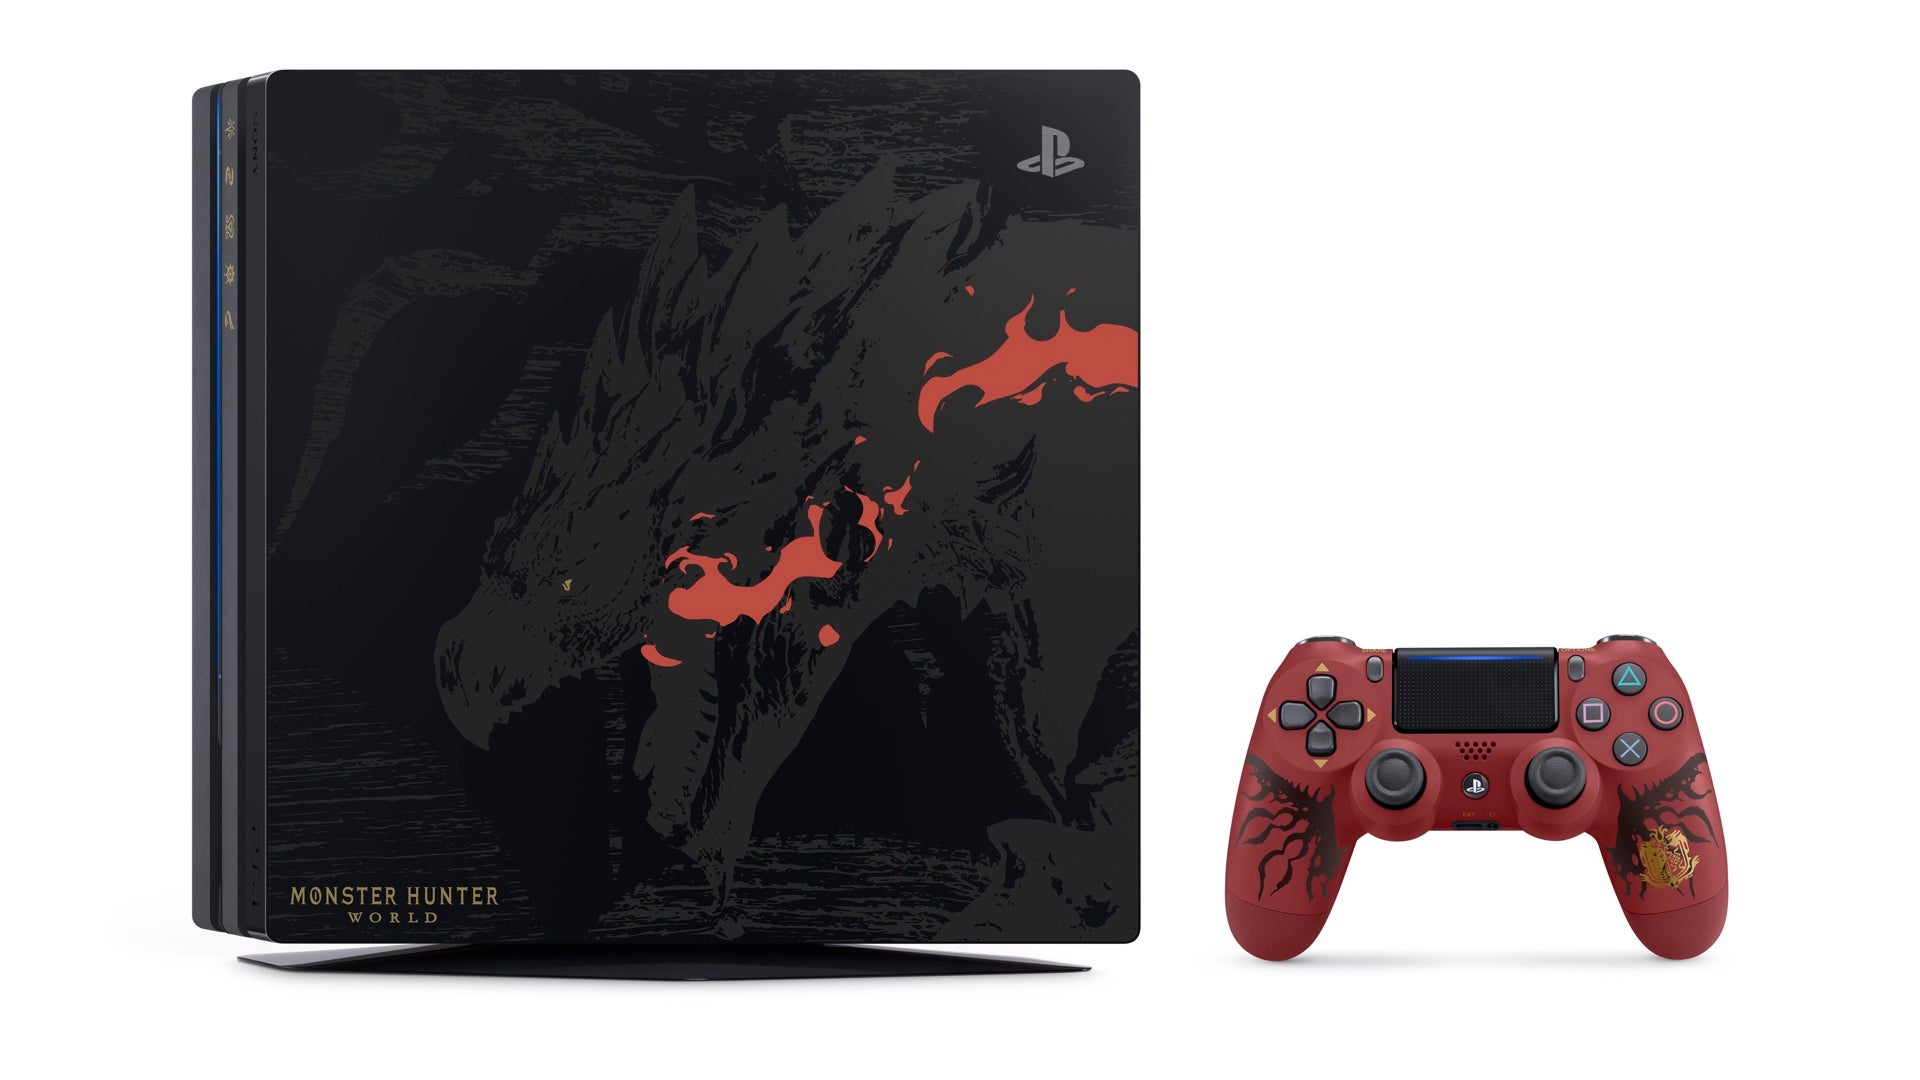 Sony reveals new limited edition Monster Hunter World PS4 Pro